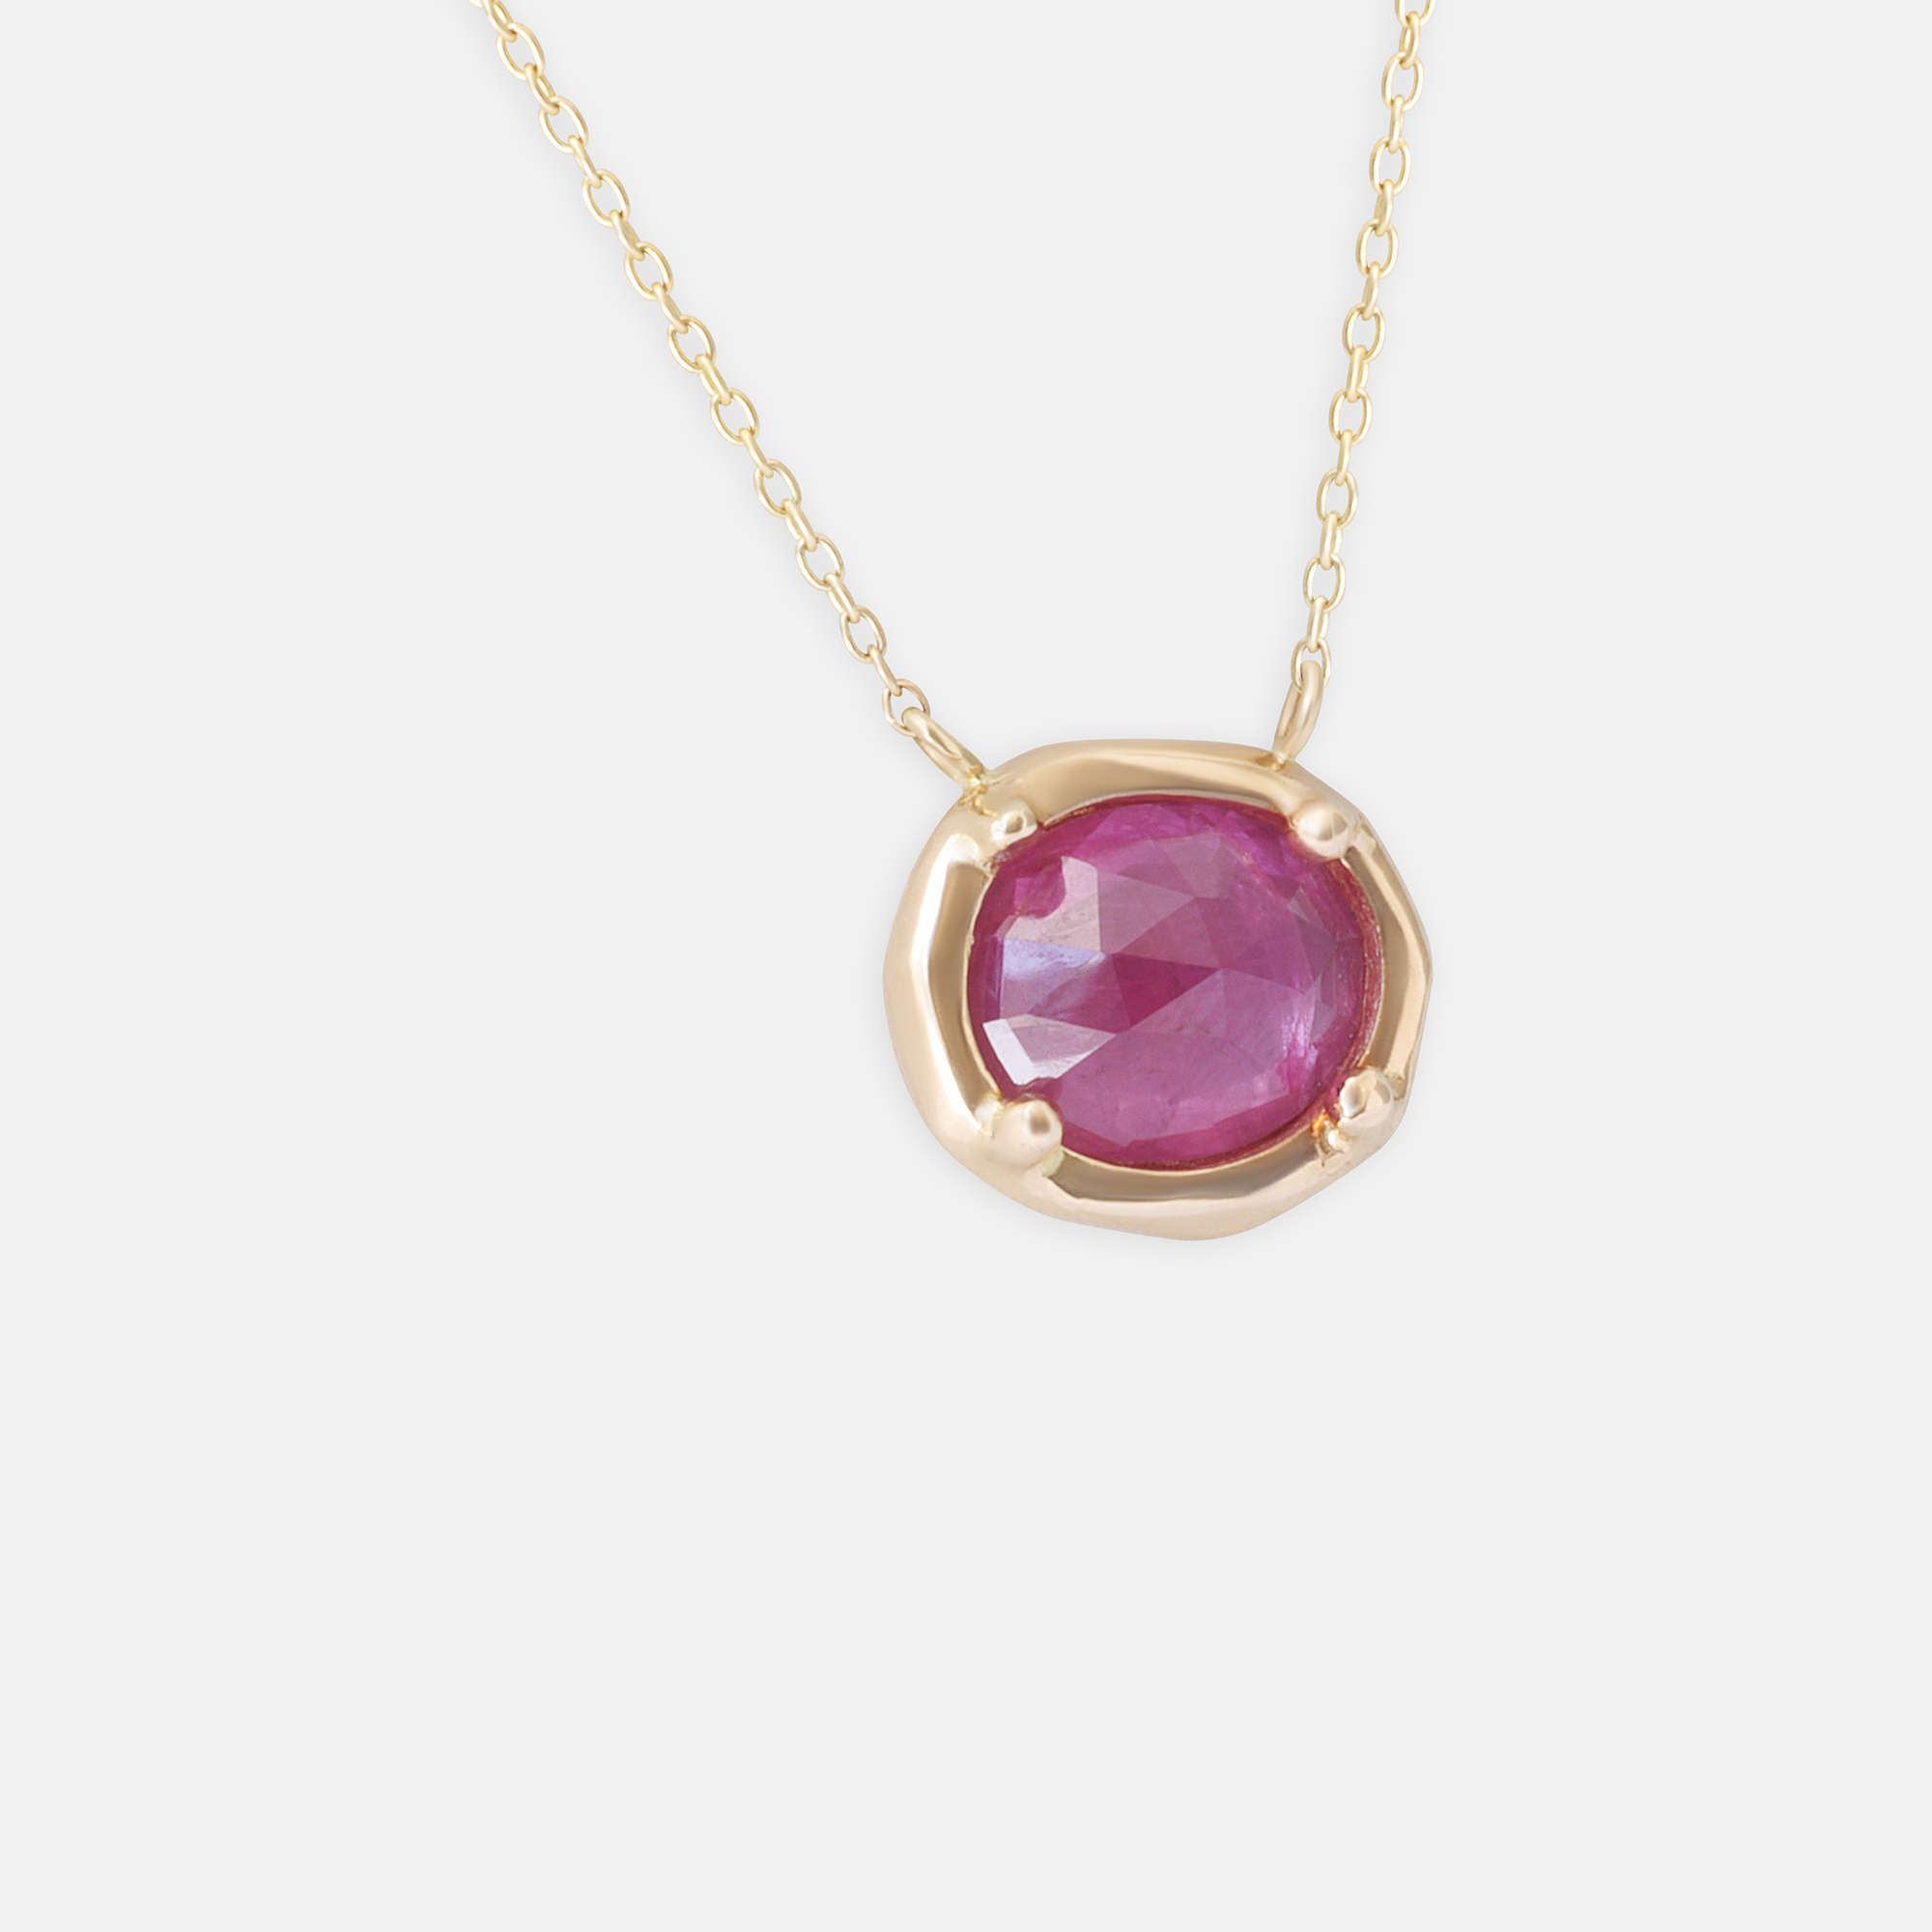 Pebble / Ruby Freeform Pendant By fitzgerald jewelry in pendants Category